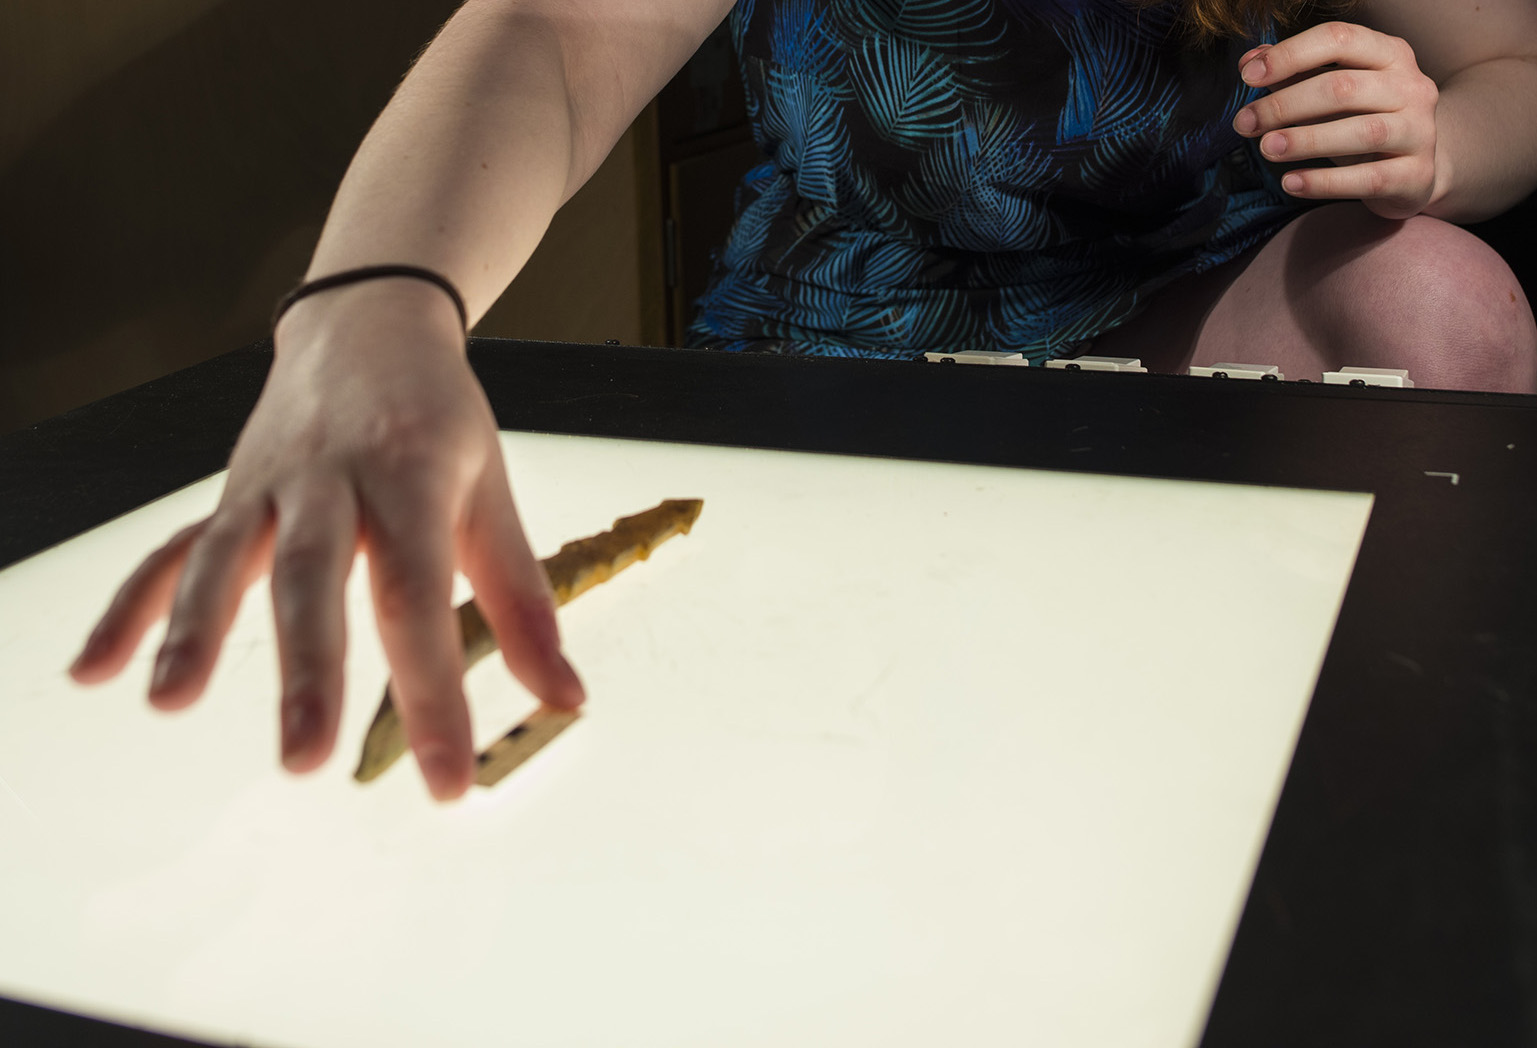 a volunteer places an item on a light table for a photo